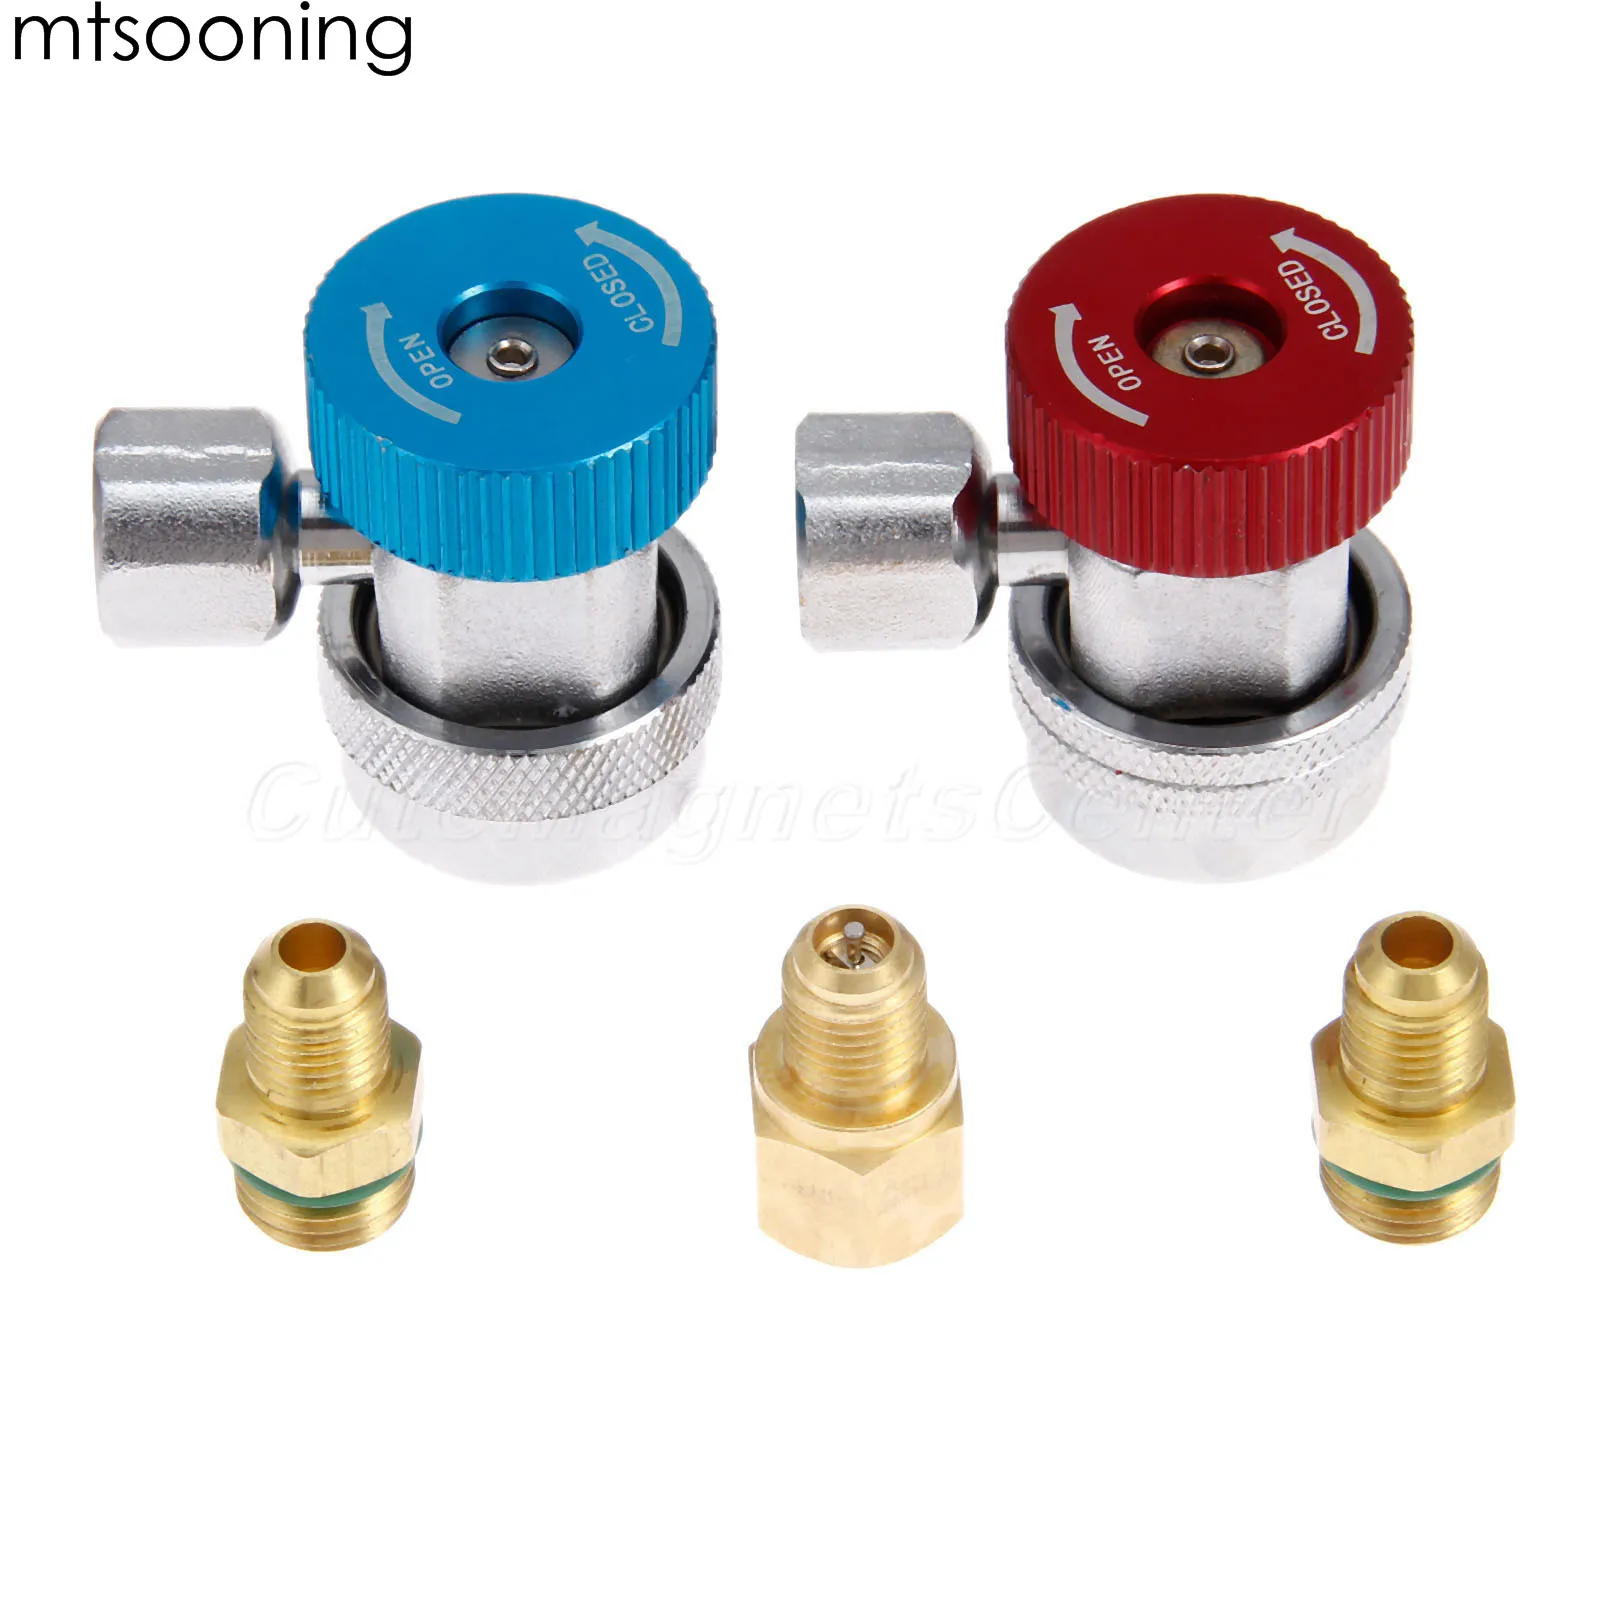 mtsooning 1pair Auto R134A AC Air Condition Adjustable Quick Coupler Refrigerant High Low Adapter Connector Manifold Gauge Set